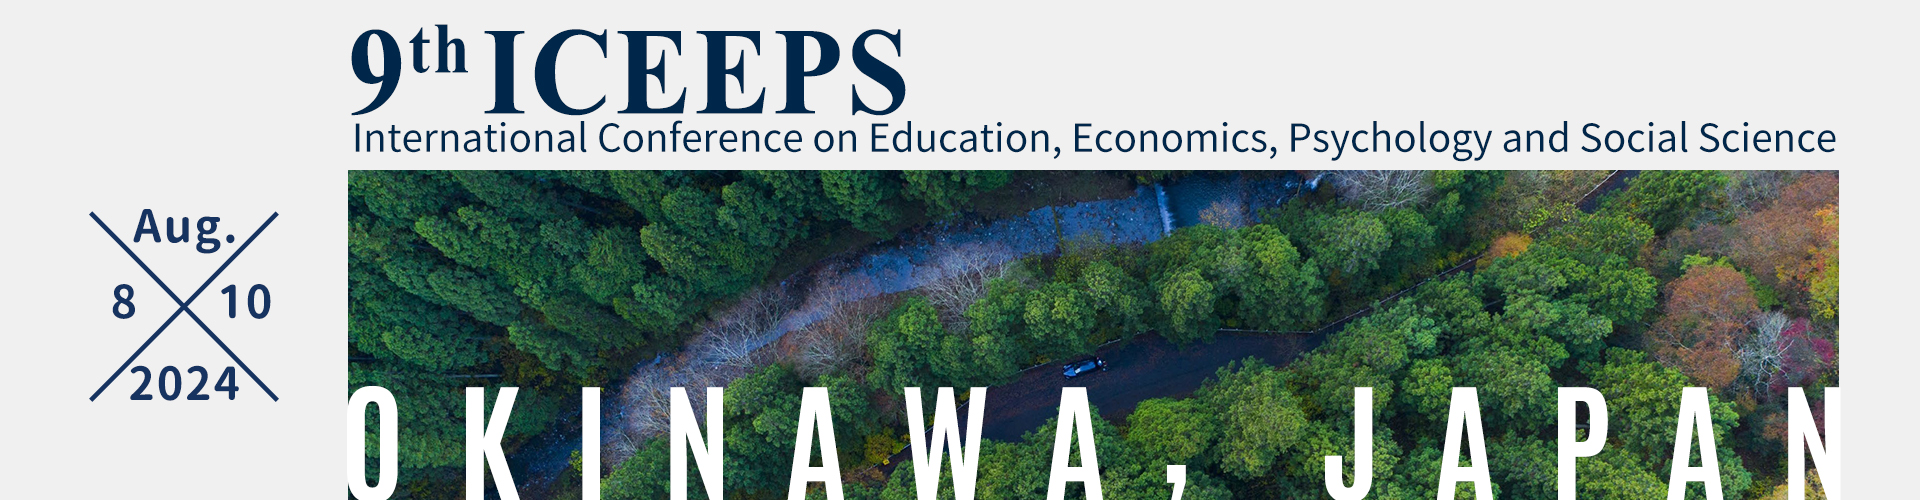 9th International Conference on Education, Economics, Psychology and Social Science, Okinawa, Japan